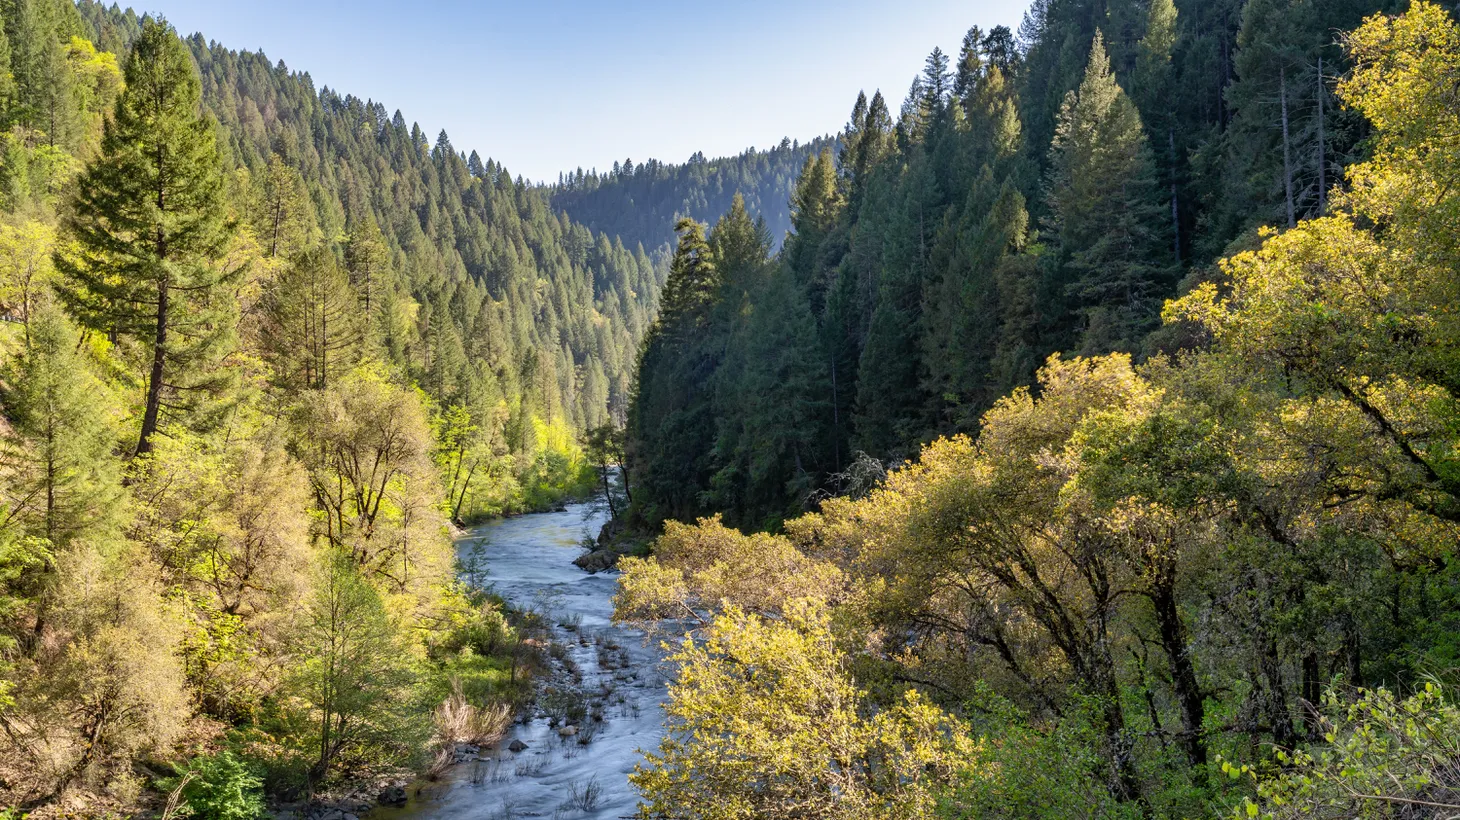 The North Fork of the Yuba River winds through the Tahoe National Forest in California’s Sierra Nevada, where noted futurist Kim Stanely Robinson finds solace, inspiration and reasons for optimism.